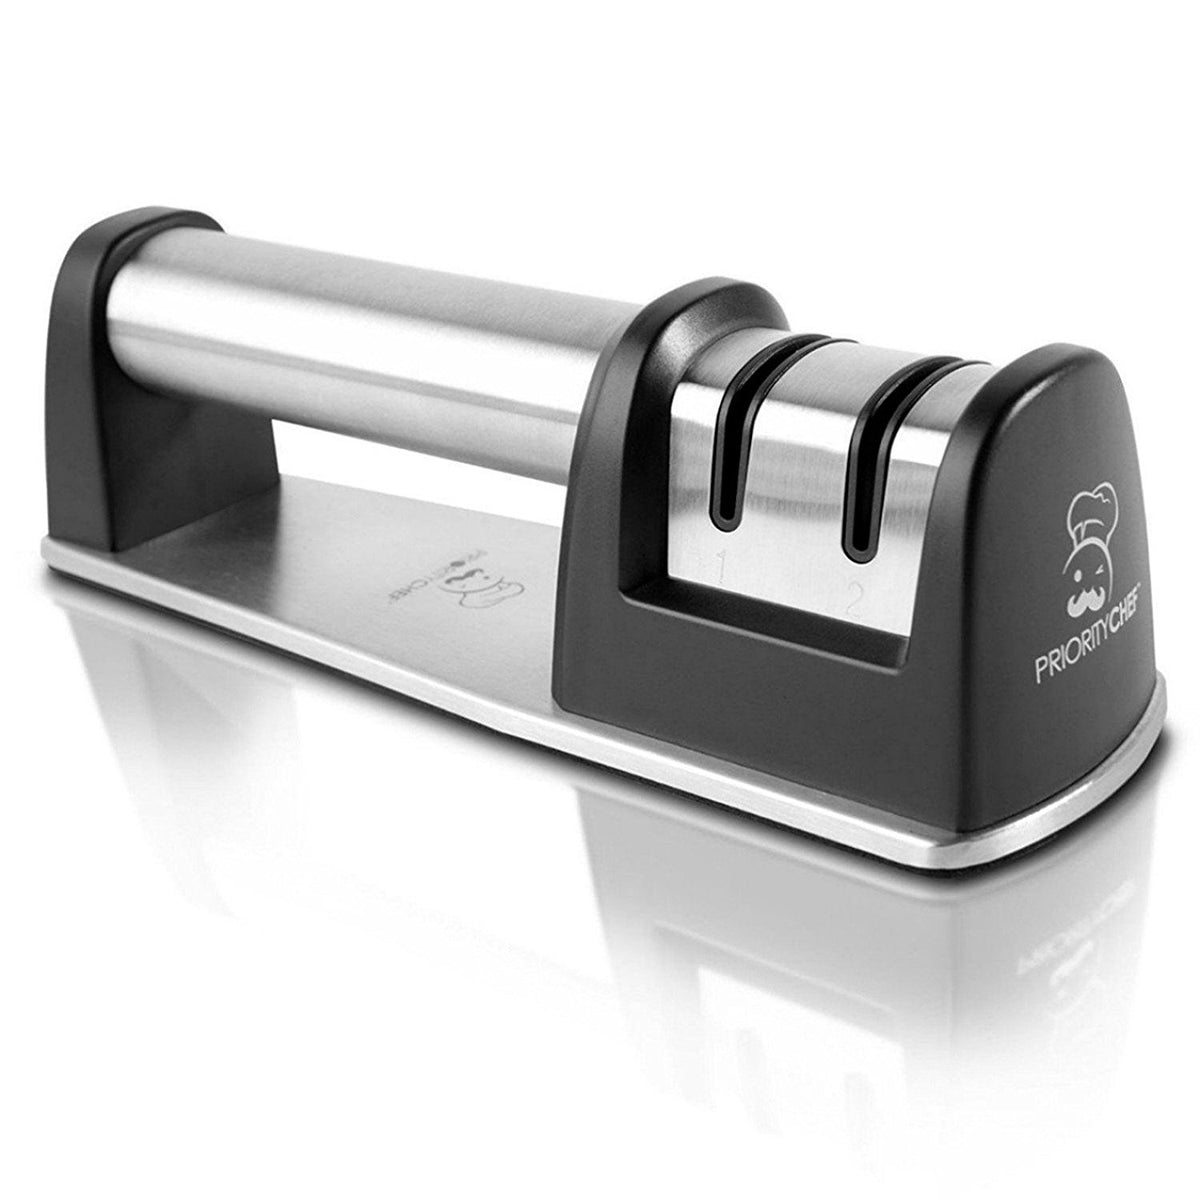 Professional Knife Sharpeners for Kitchen Knives - Diamond - Designed with  Tight Clamp, Stable Base - Easy To Assemble with Reference Guide 